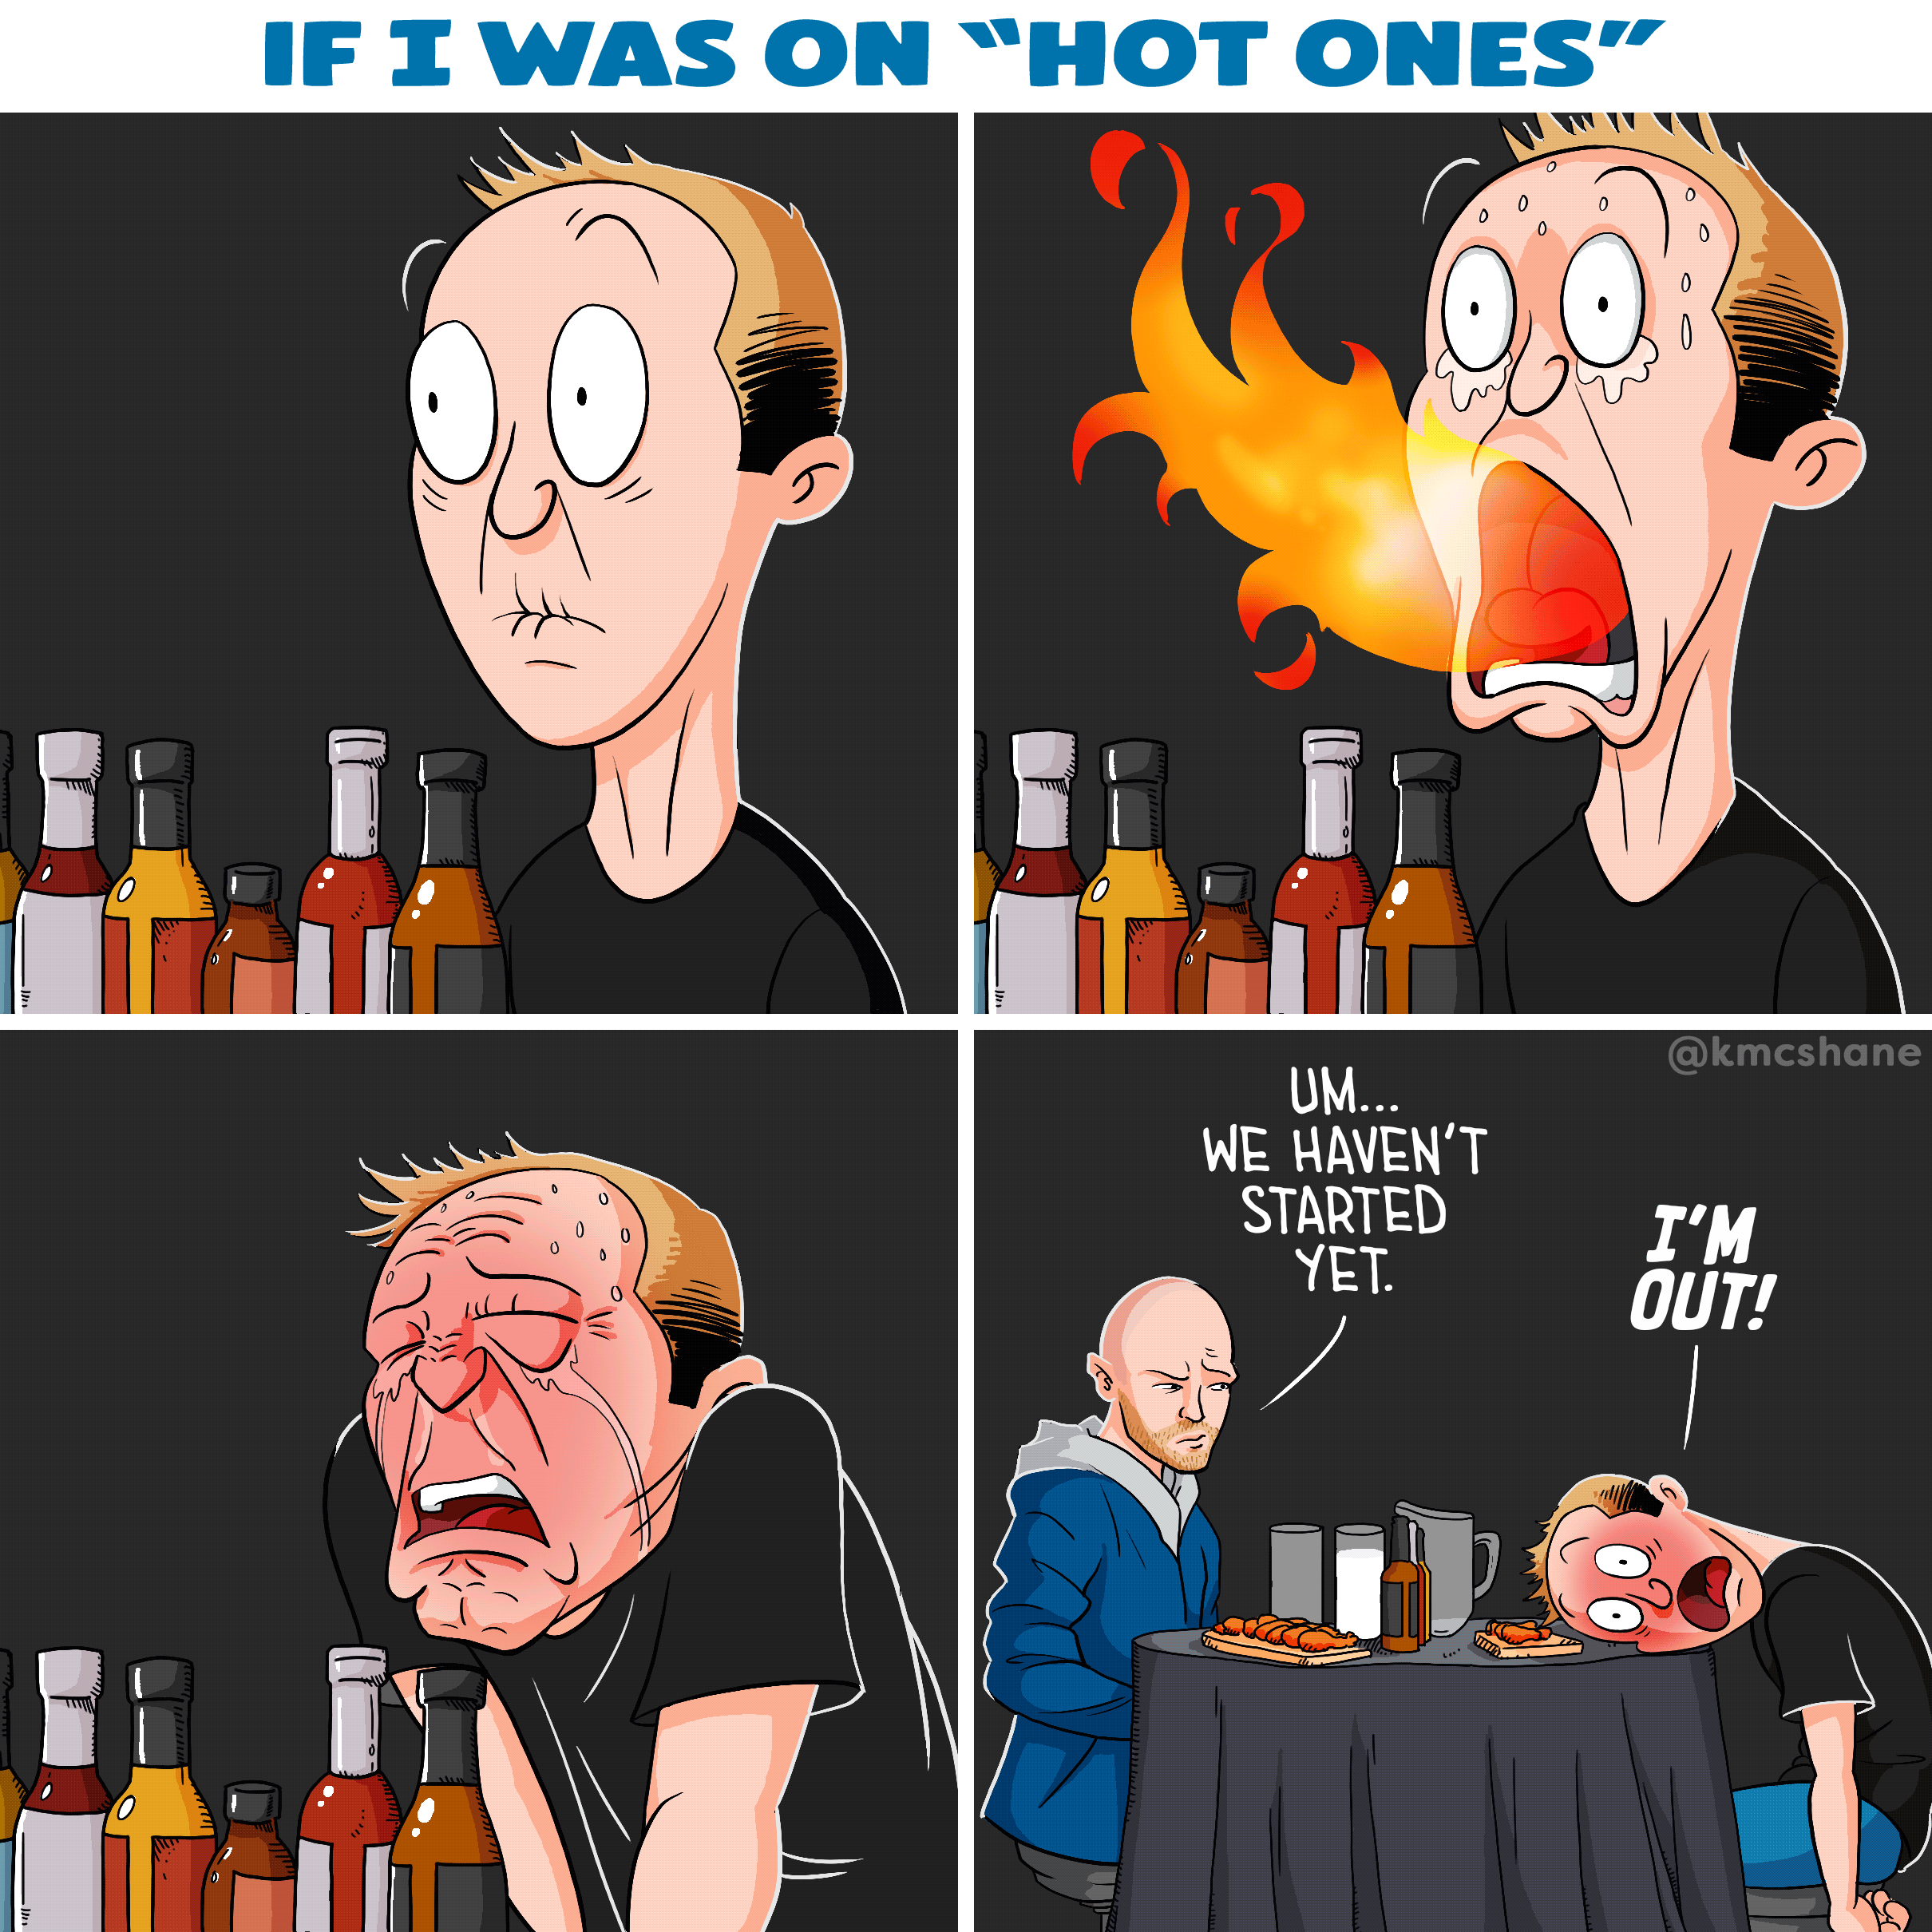 If I Was On “Hot Ones”